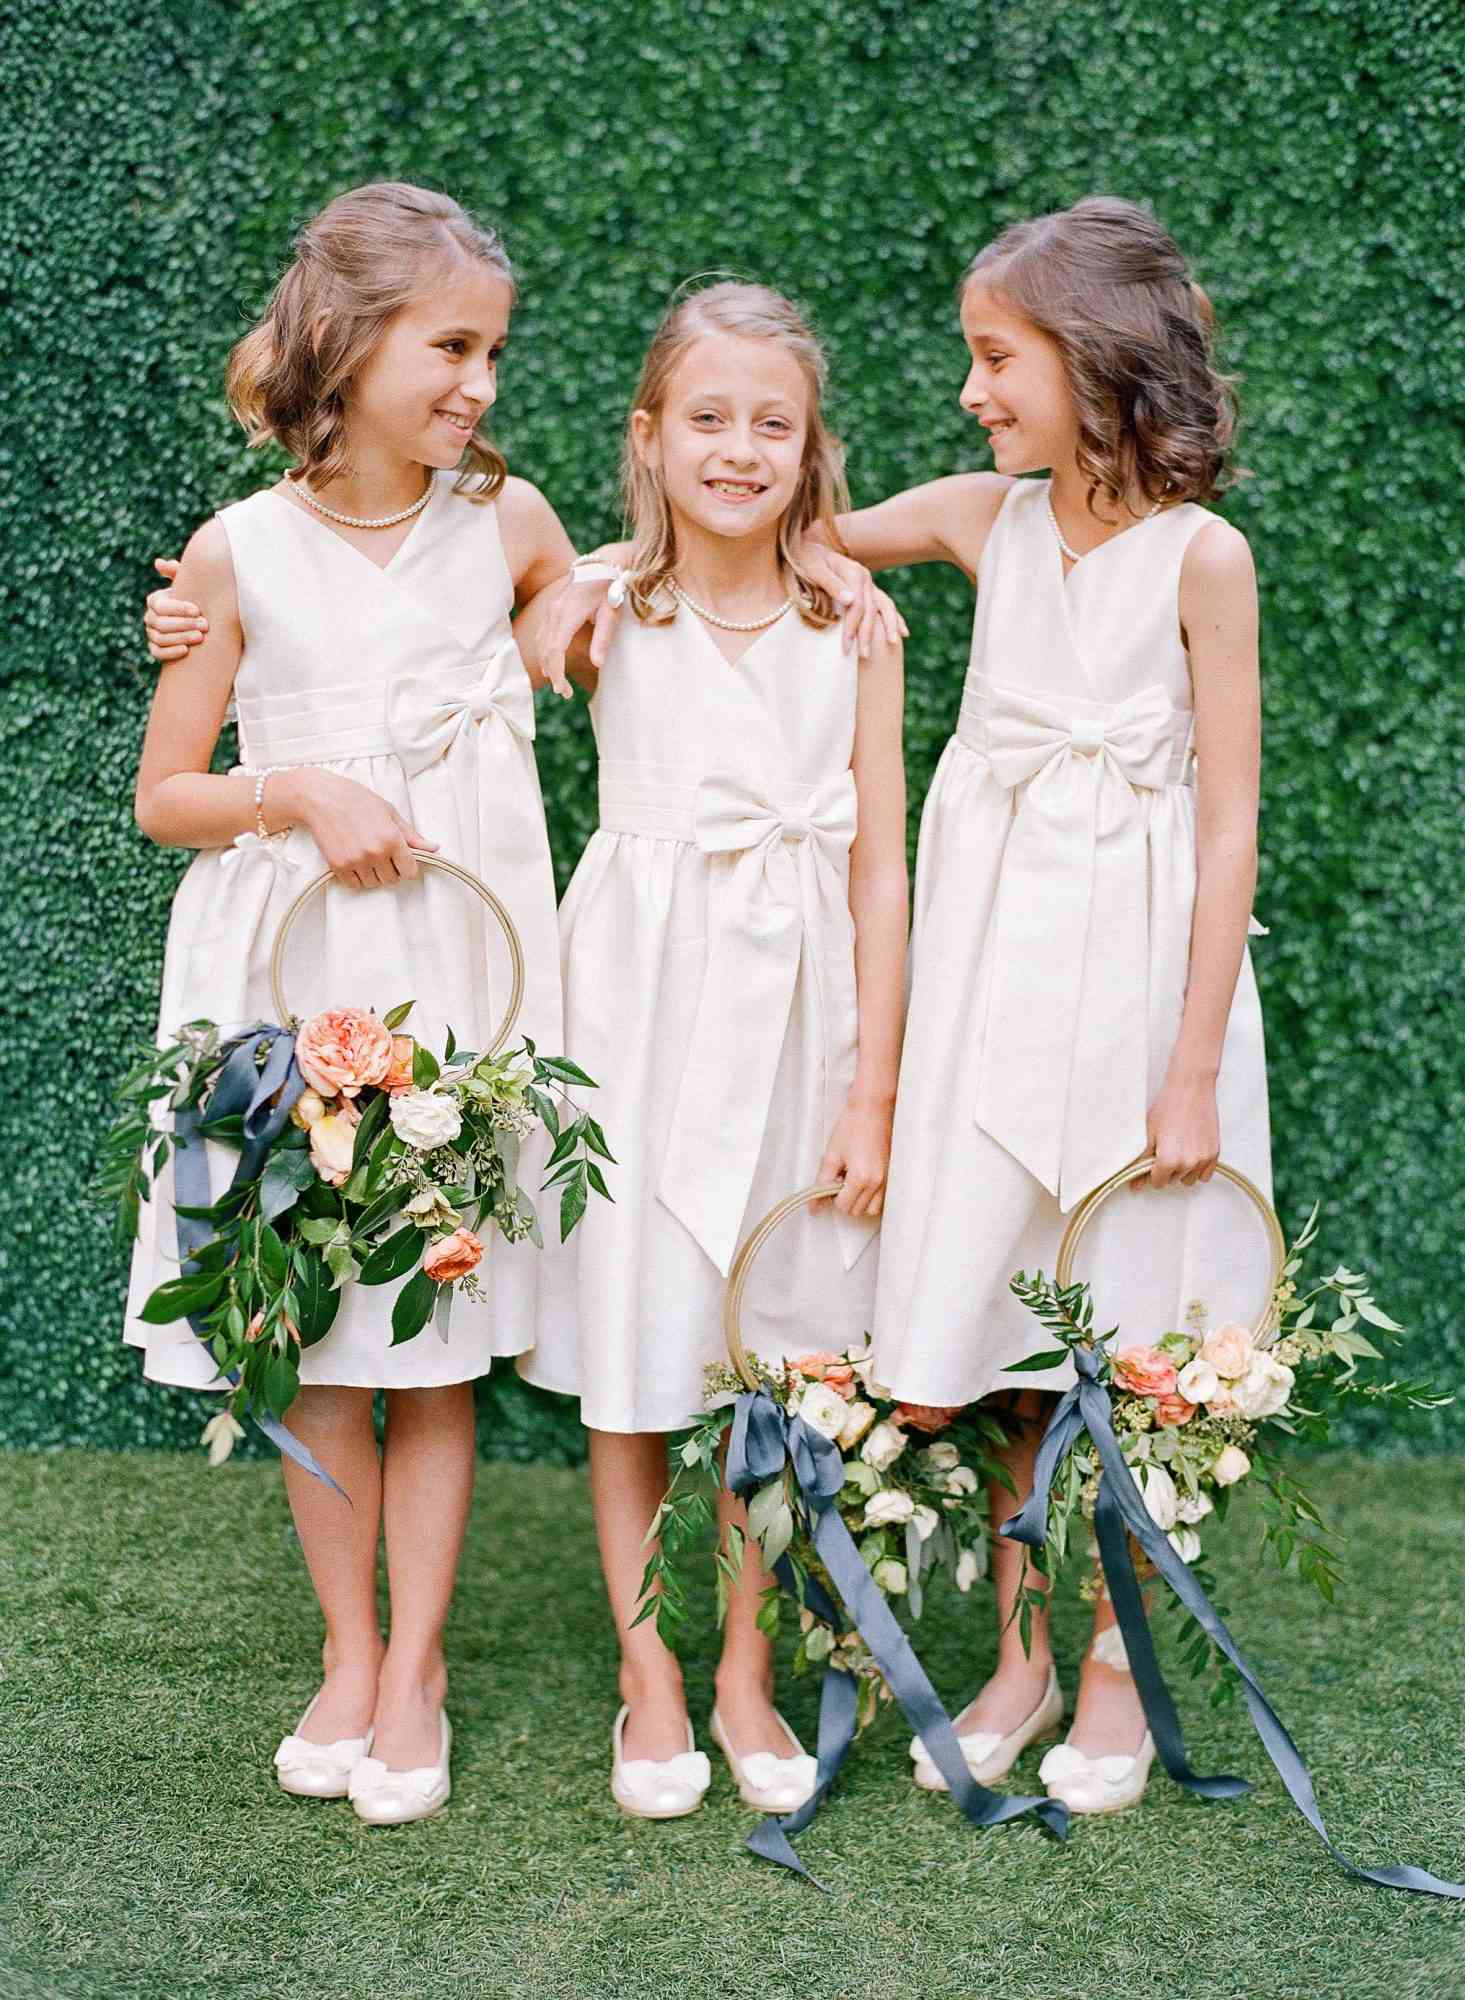 Adorable Hairstyle Ideas for Your Flower Girls | Martha Stewart